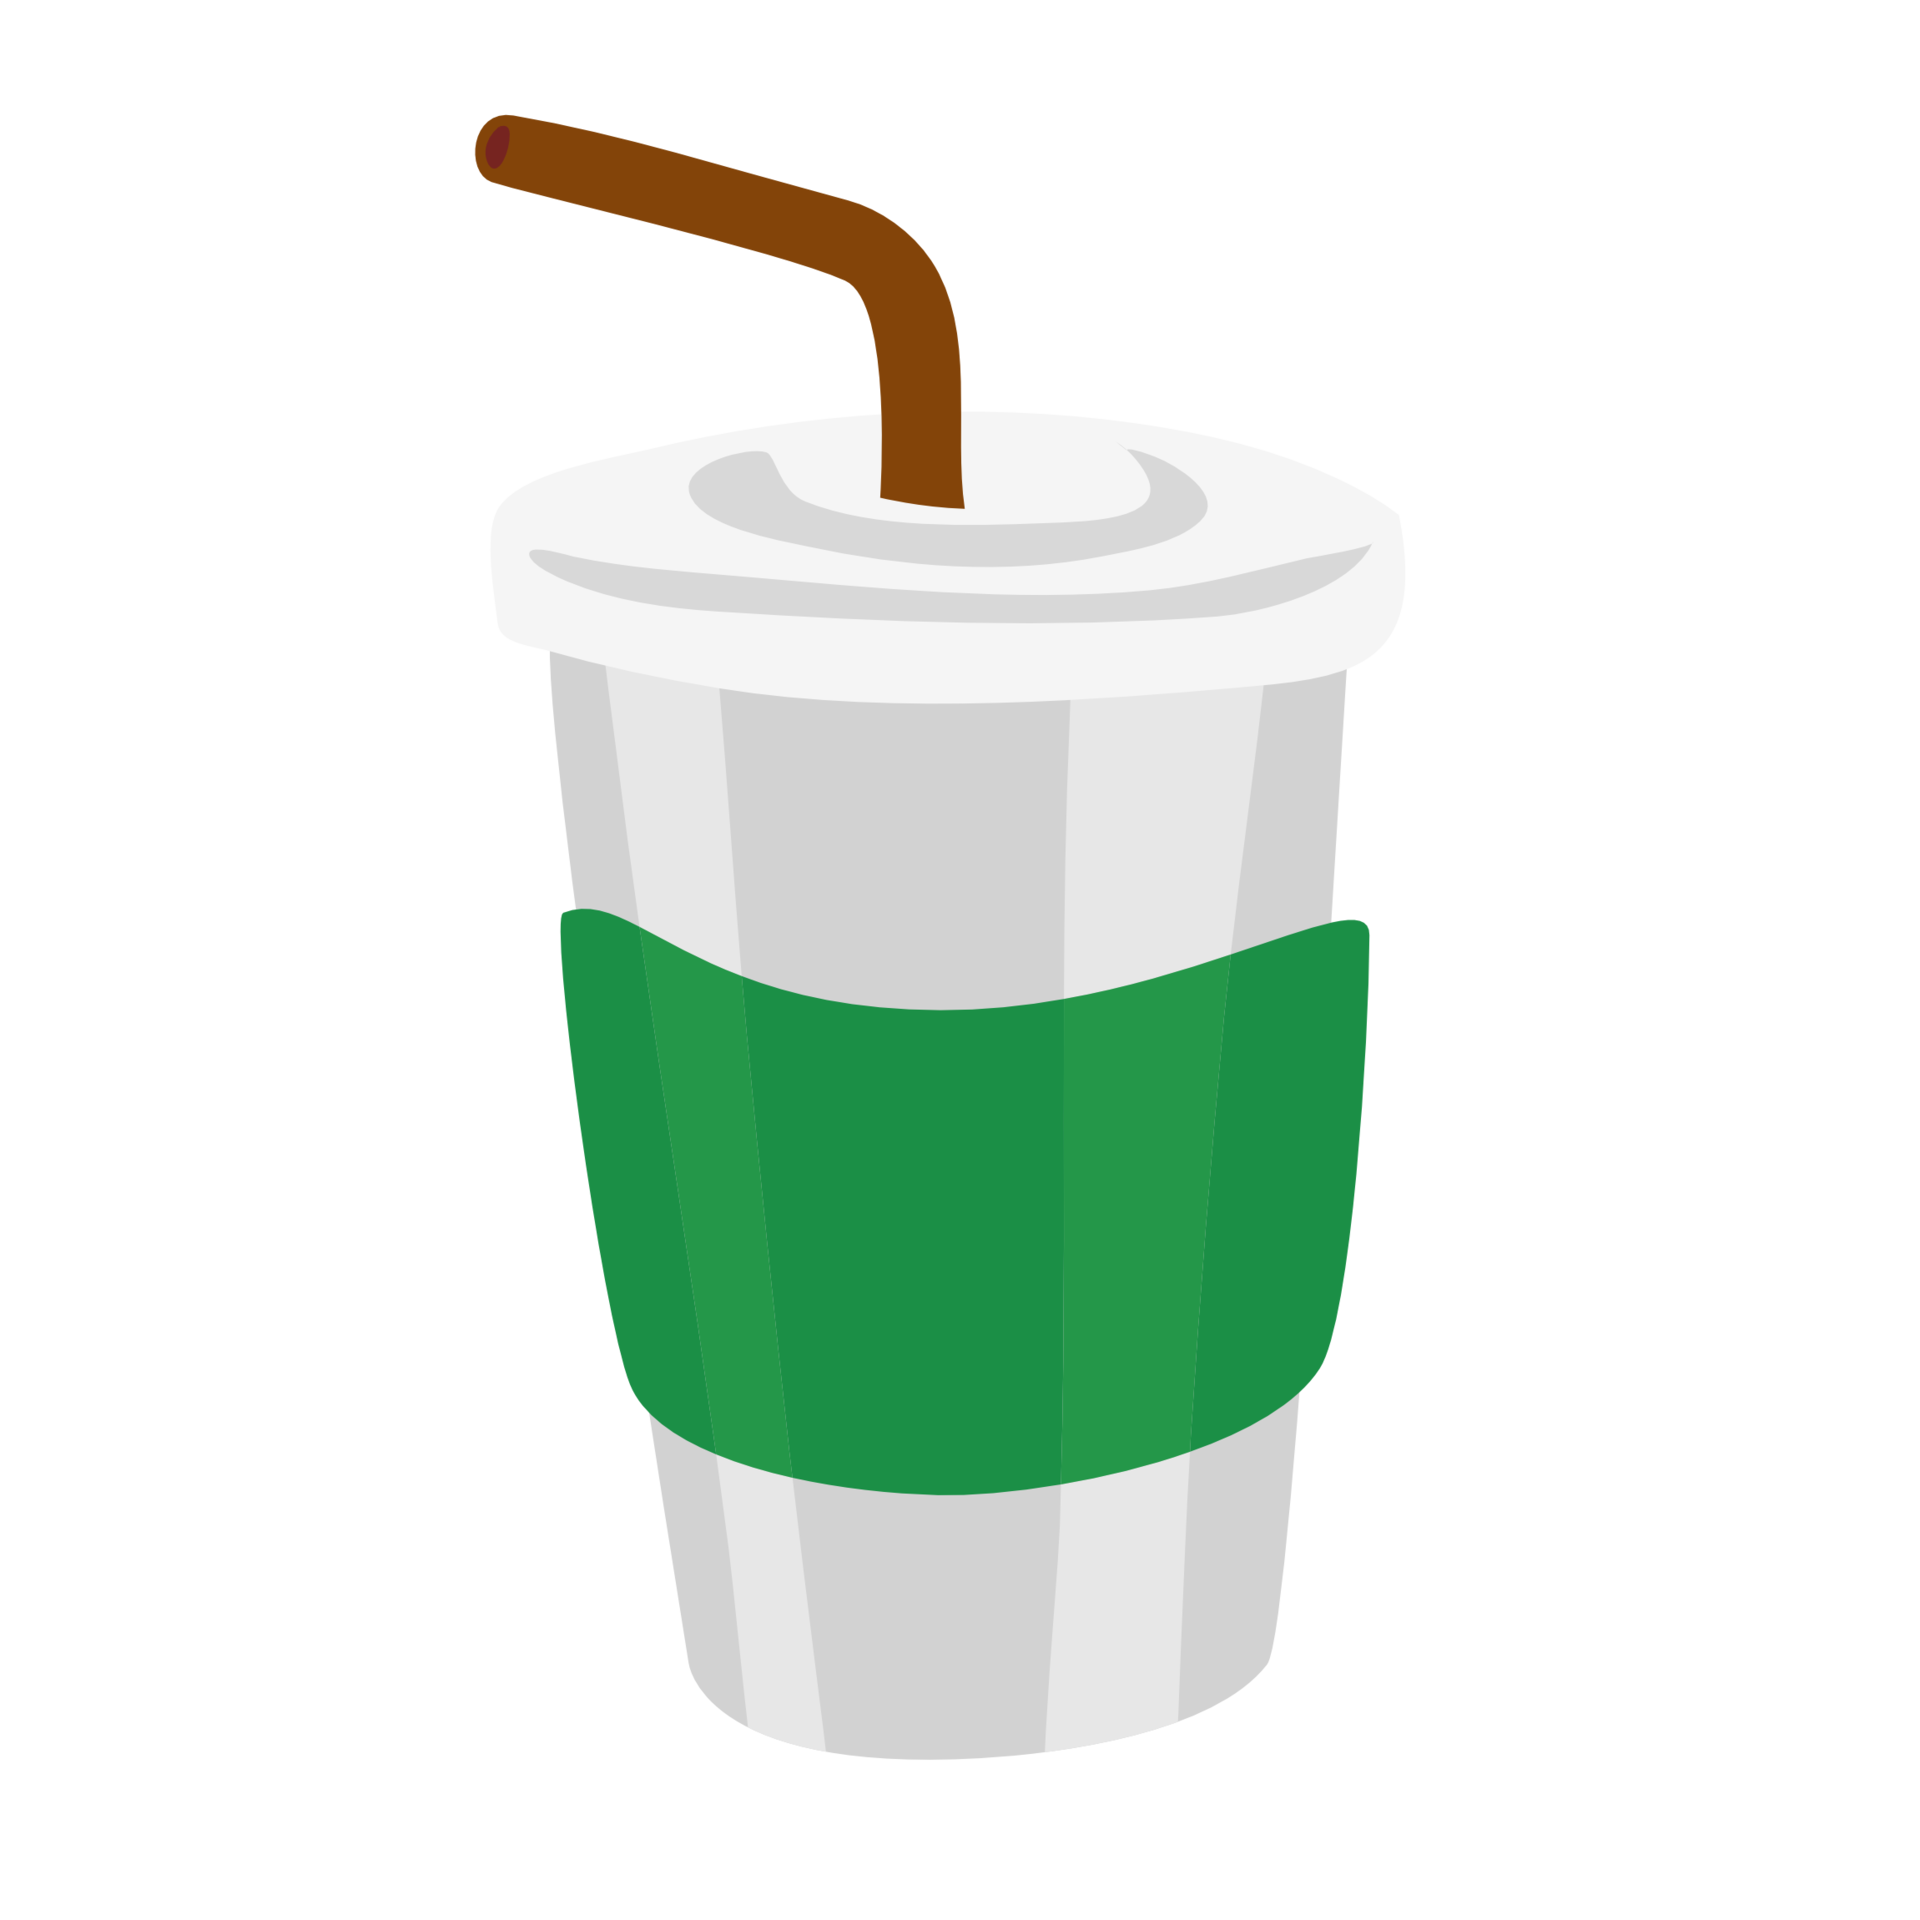 https://static.vecteezy.com/system/resources/previews/009/637/566/original/drink-cup-cute-cartoon-file-png.png